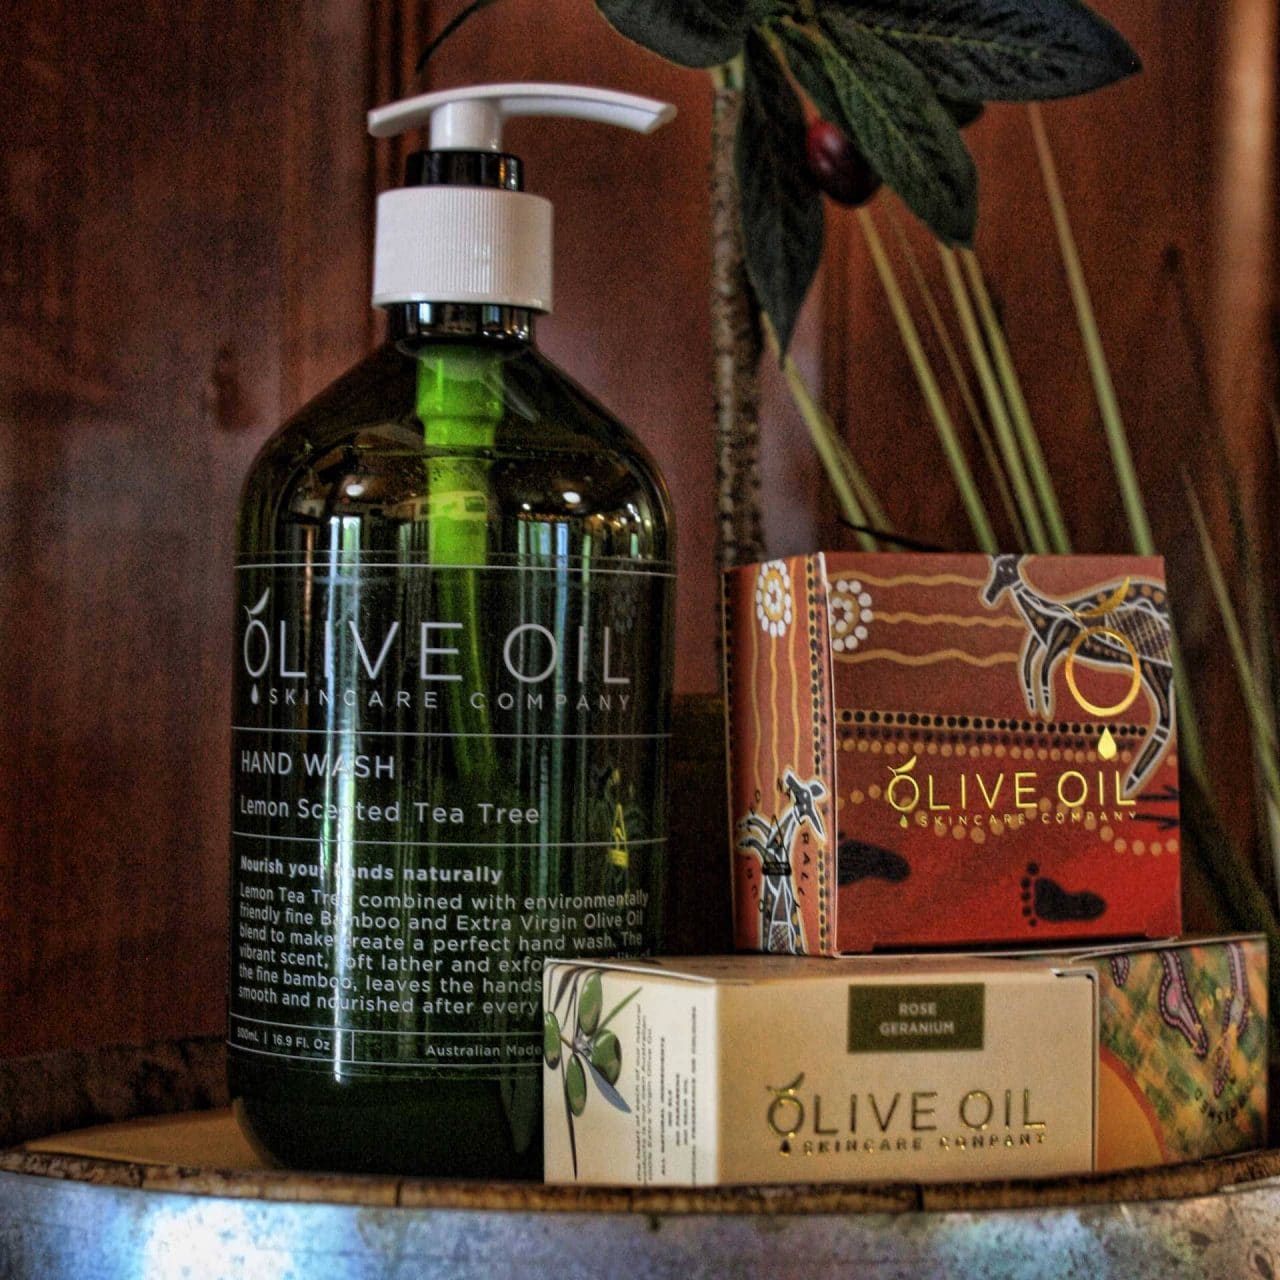 Olive Oil Skincare Company hand wash and bar soap